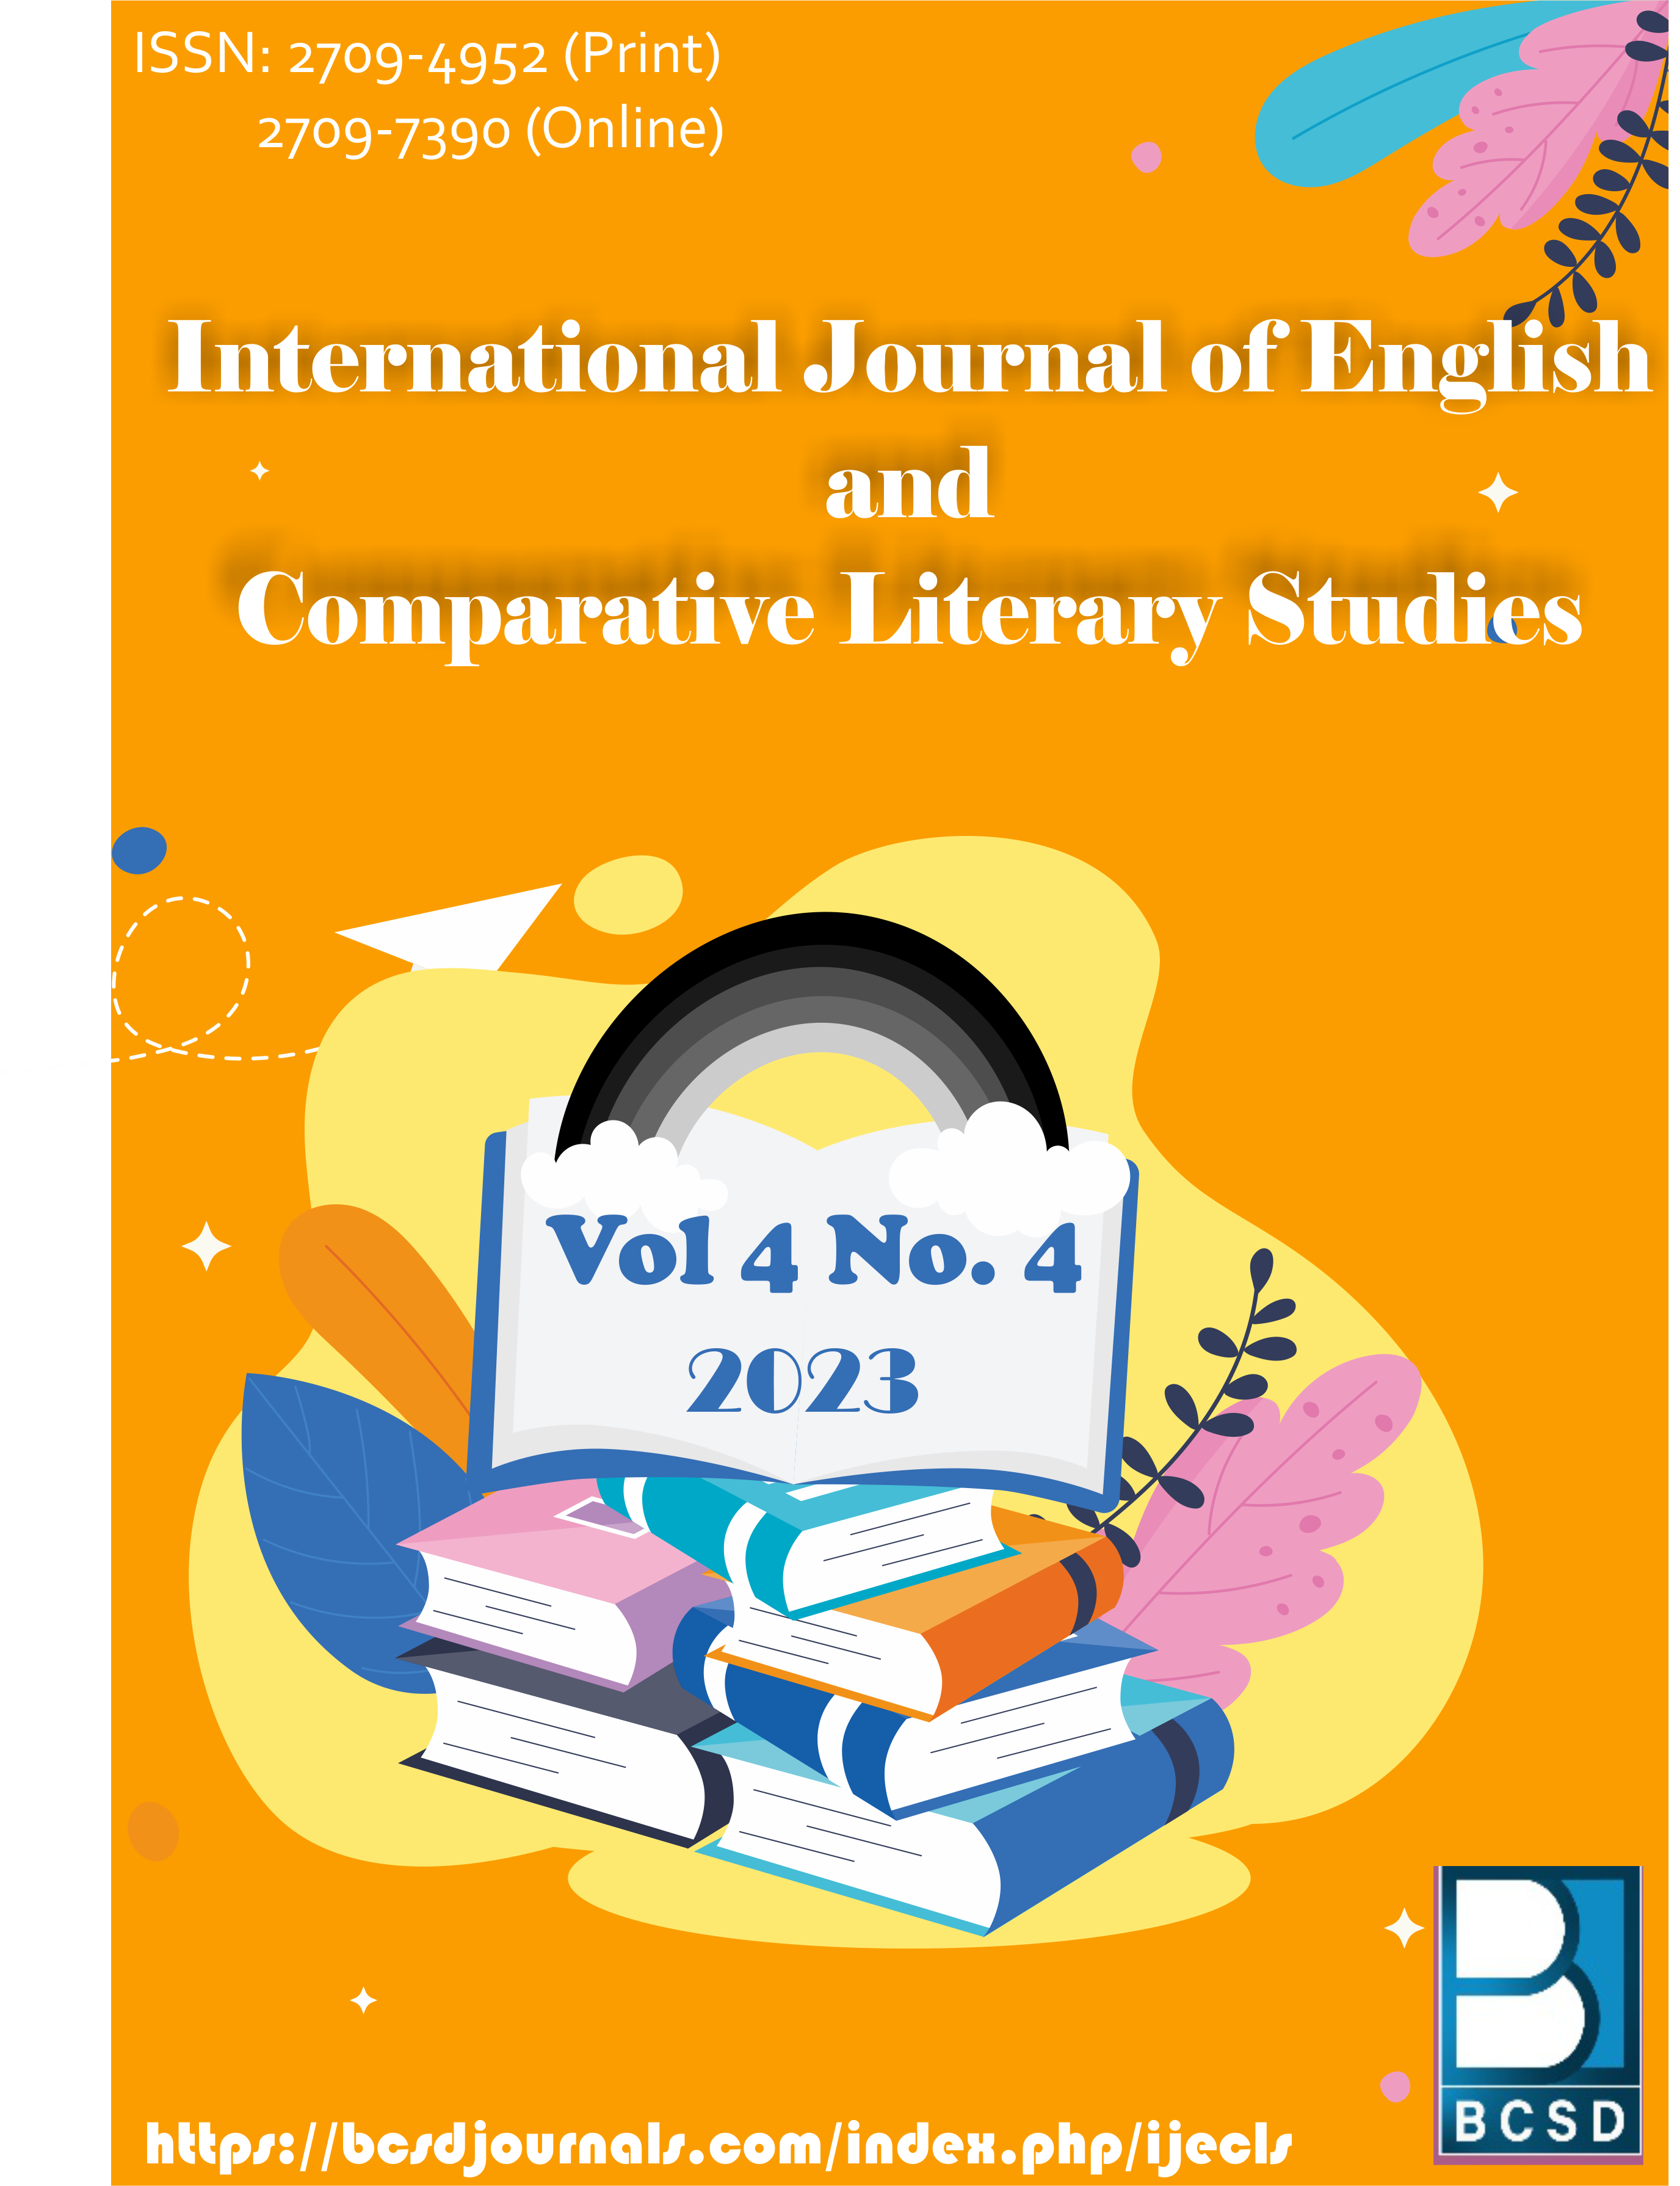 					View Vol. 4 No. 4 (2023): International Journal of English and Comparative Literary Studies 
				